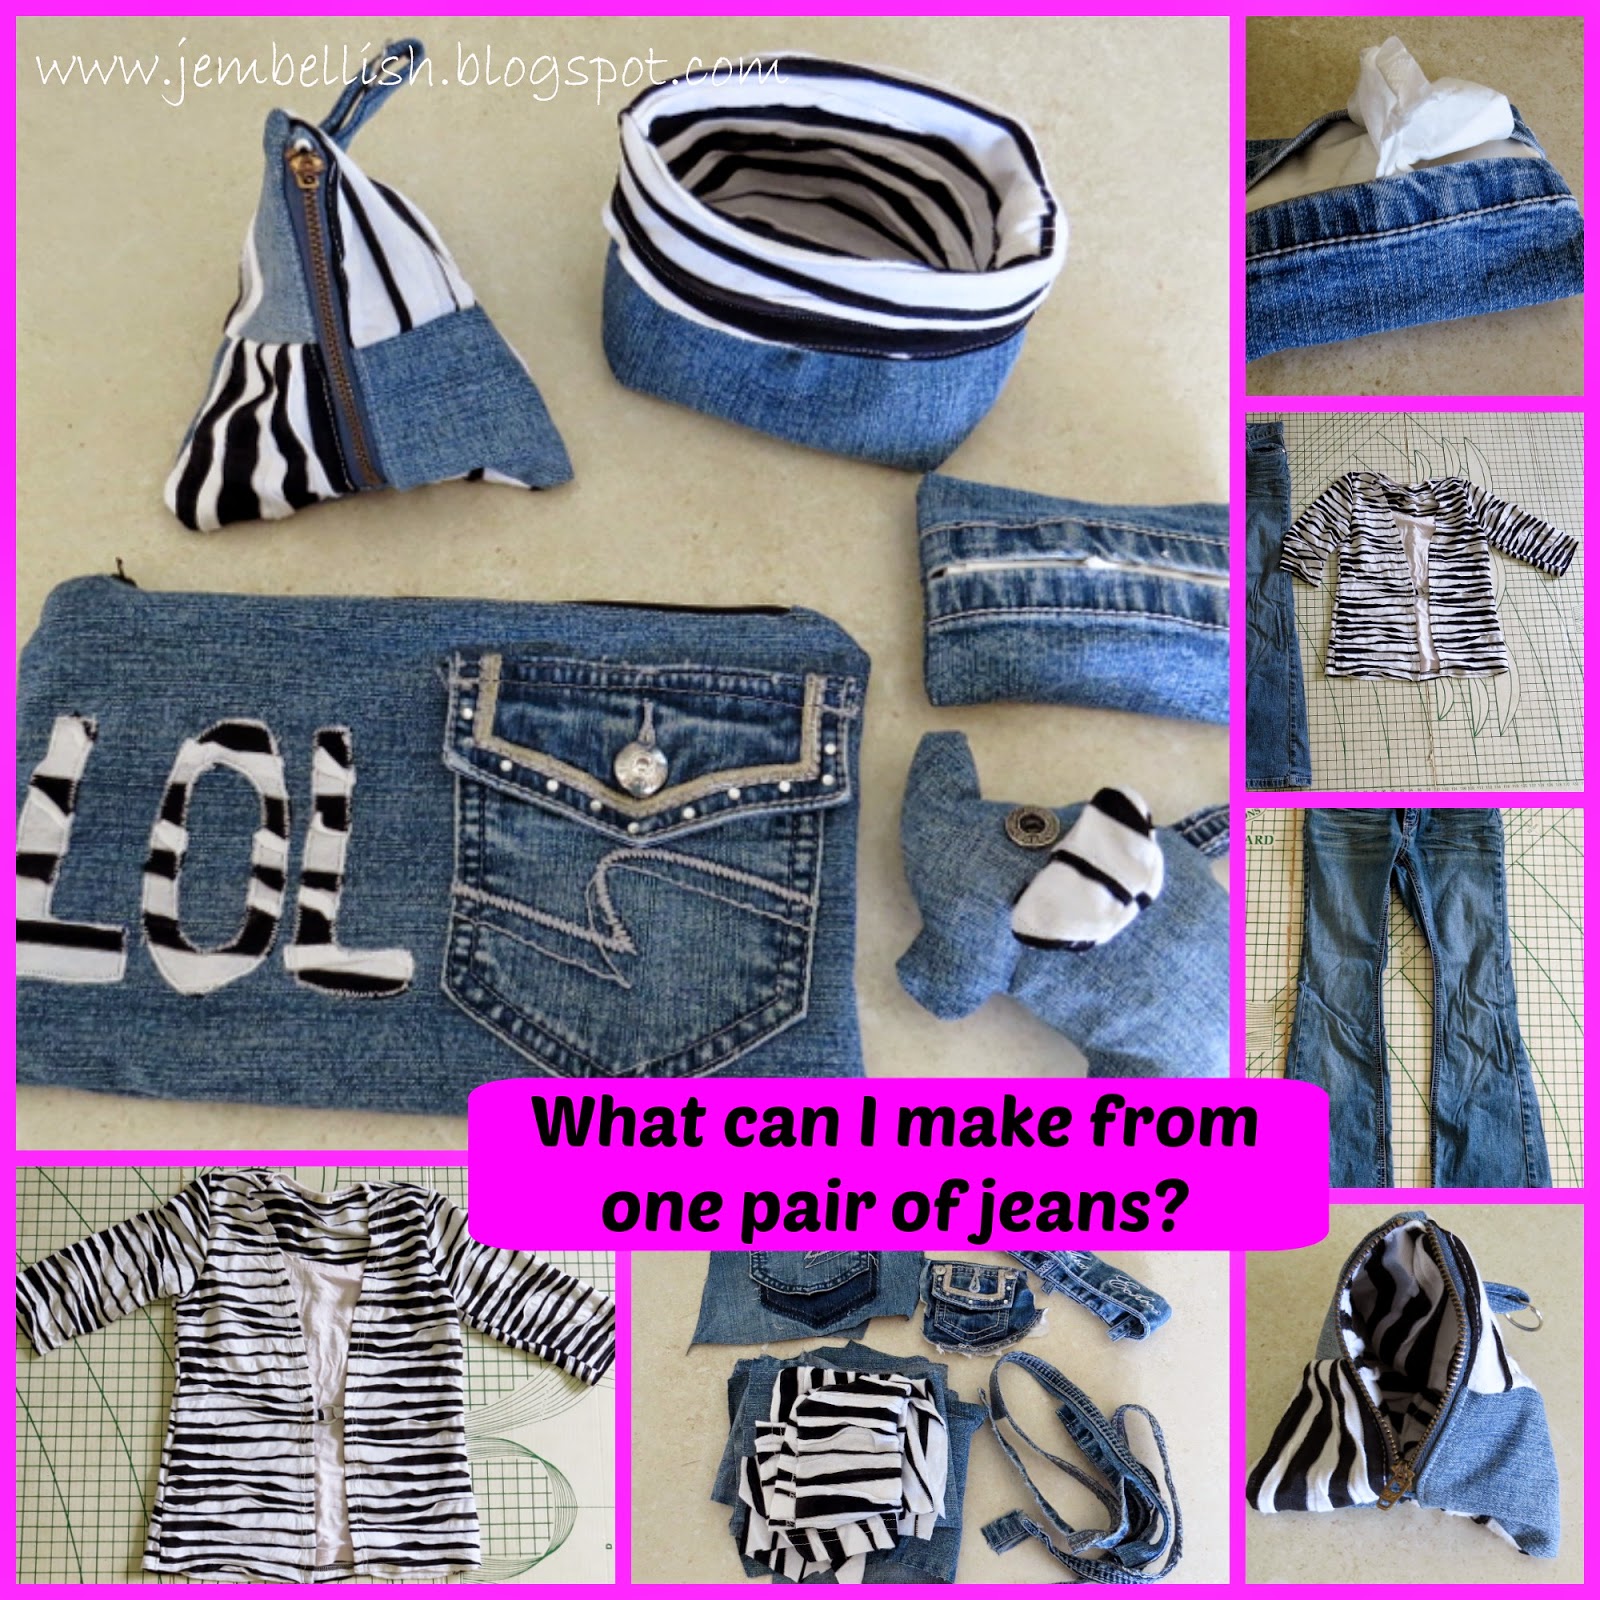 Creating my way to Success: Upcycling Jeans